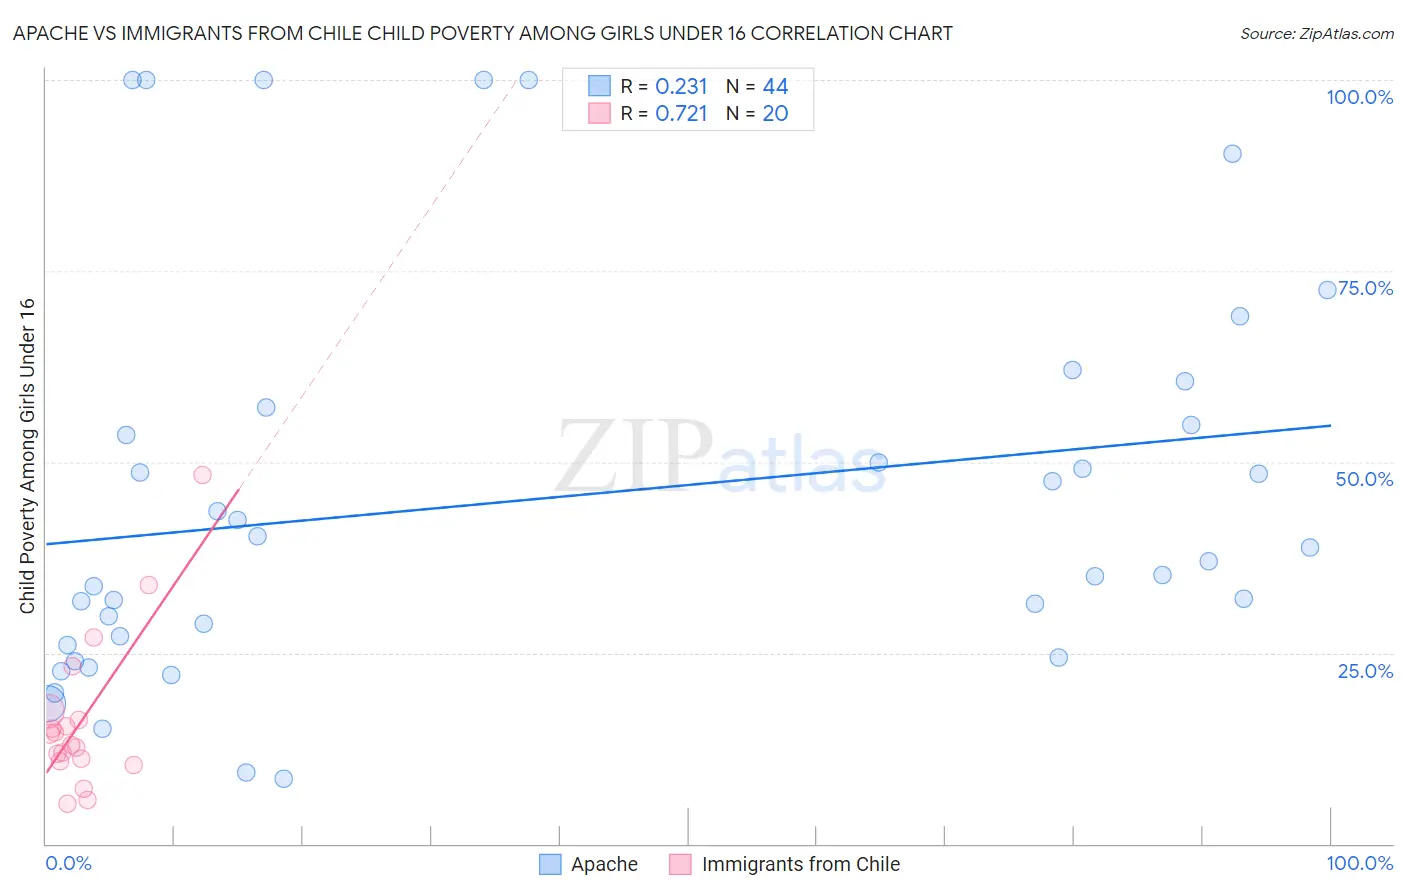 Apache vs Immigrants from Chile Child Poverty Among Girls Under 16